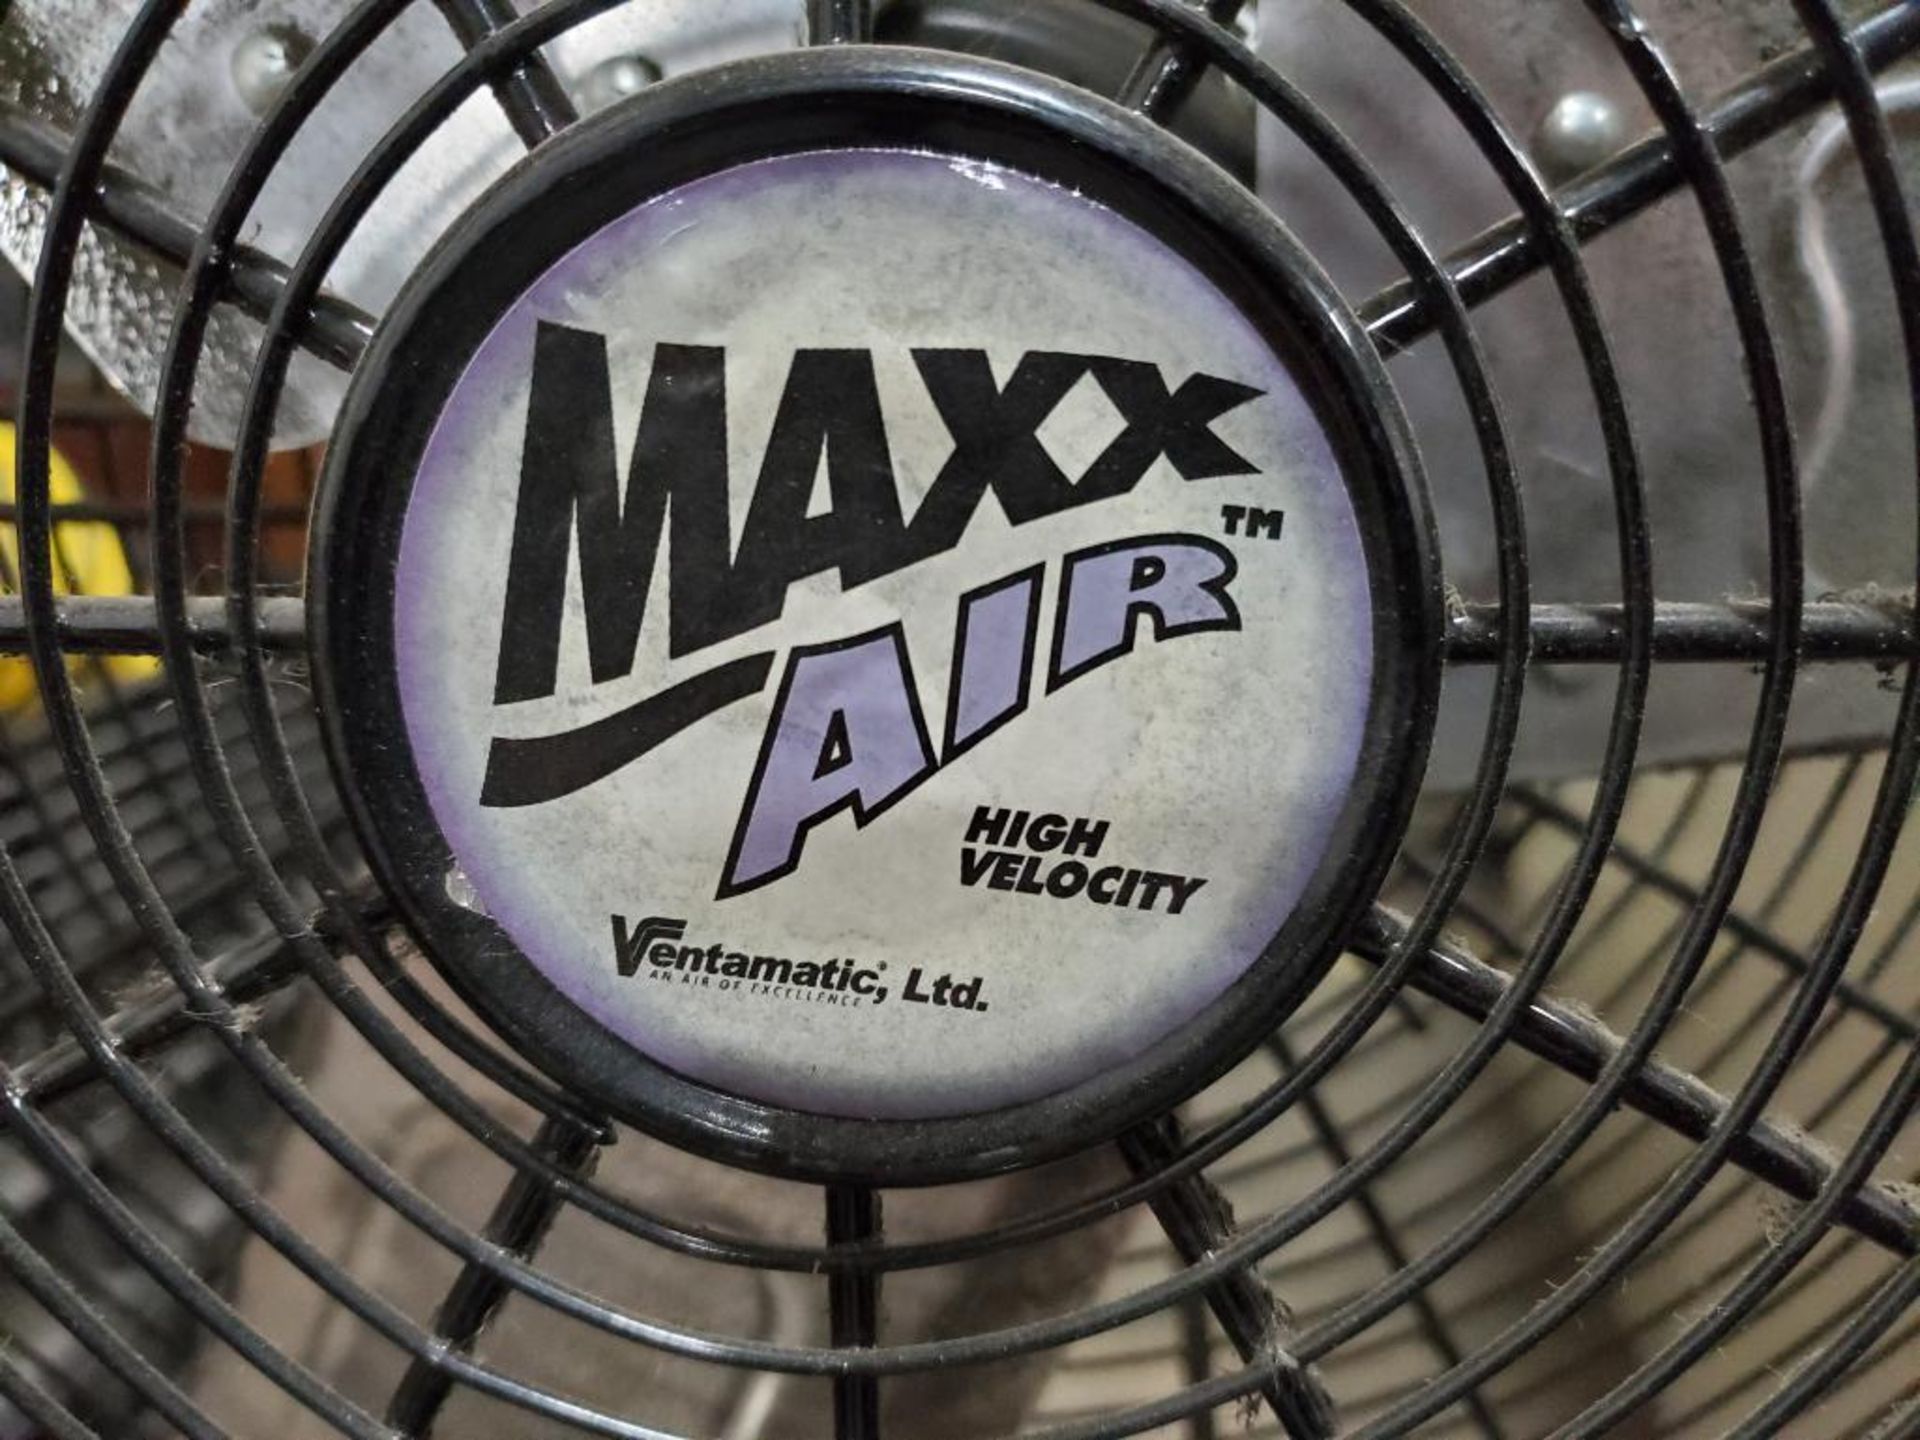 30in Maxx Air pedestal fan. 120v single phase. - Image 2 of 4